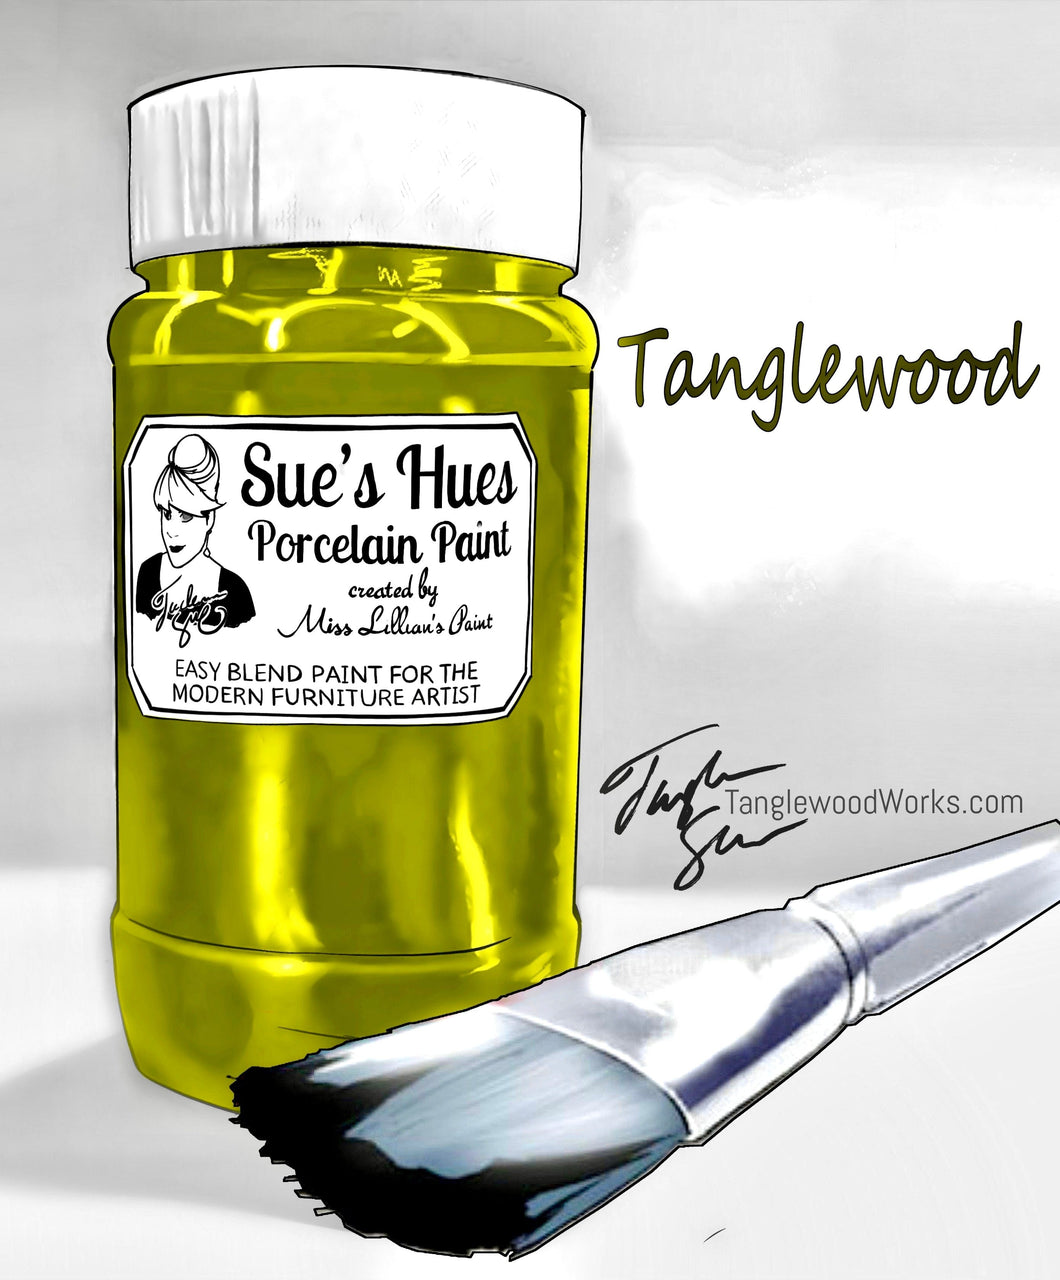 Tanglewood Works Craft Paint, Ink & Glaze 8 oz Sample Sue's Hues Porcelain Paint: Tanglewood (chartreuse, yellow-green)